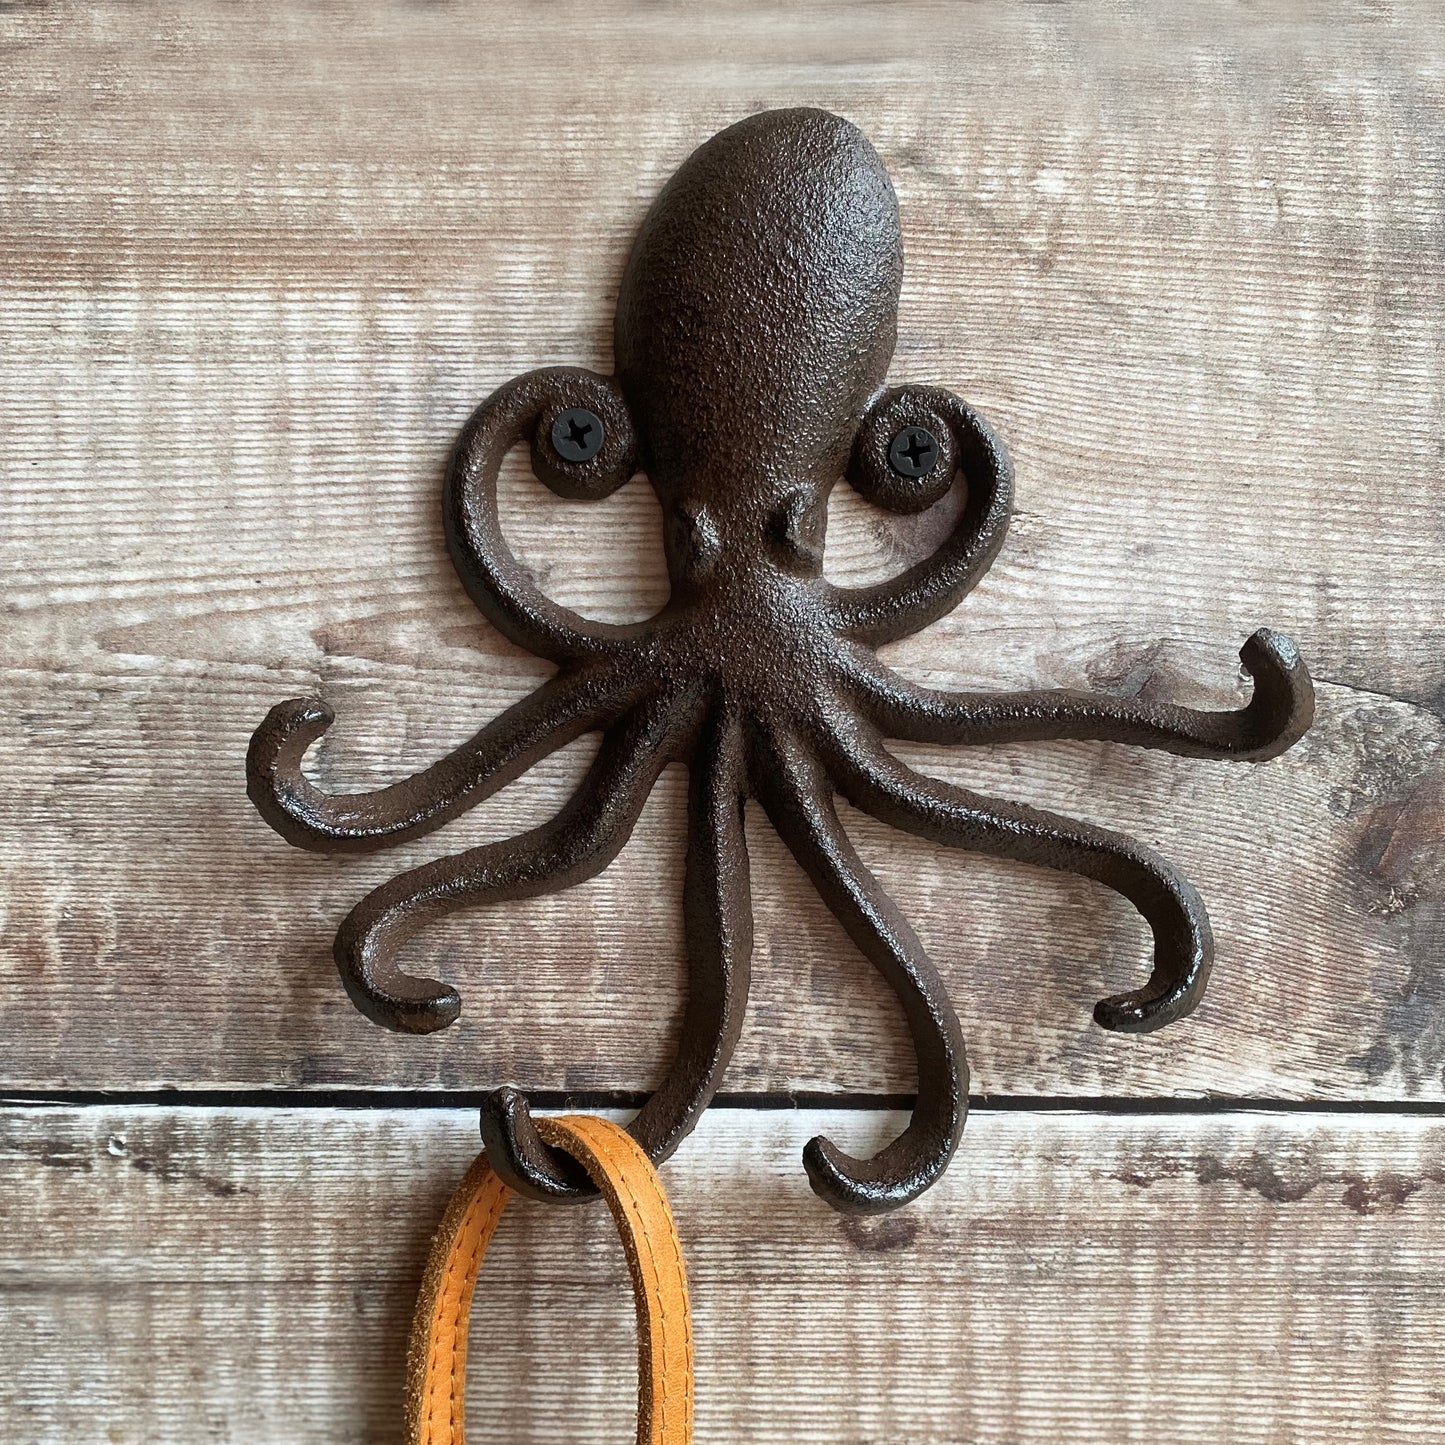 Cast Iron Large Octopus Bangarang Hook Crafts Wrought Key Nordic Simplicity  Vintage Antique Wall Mounted Clothes Hanger Key Holder Rack Factory Price  Expert Design Quality From Freelady, $24.75